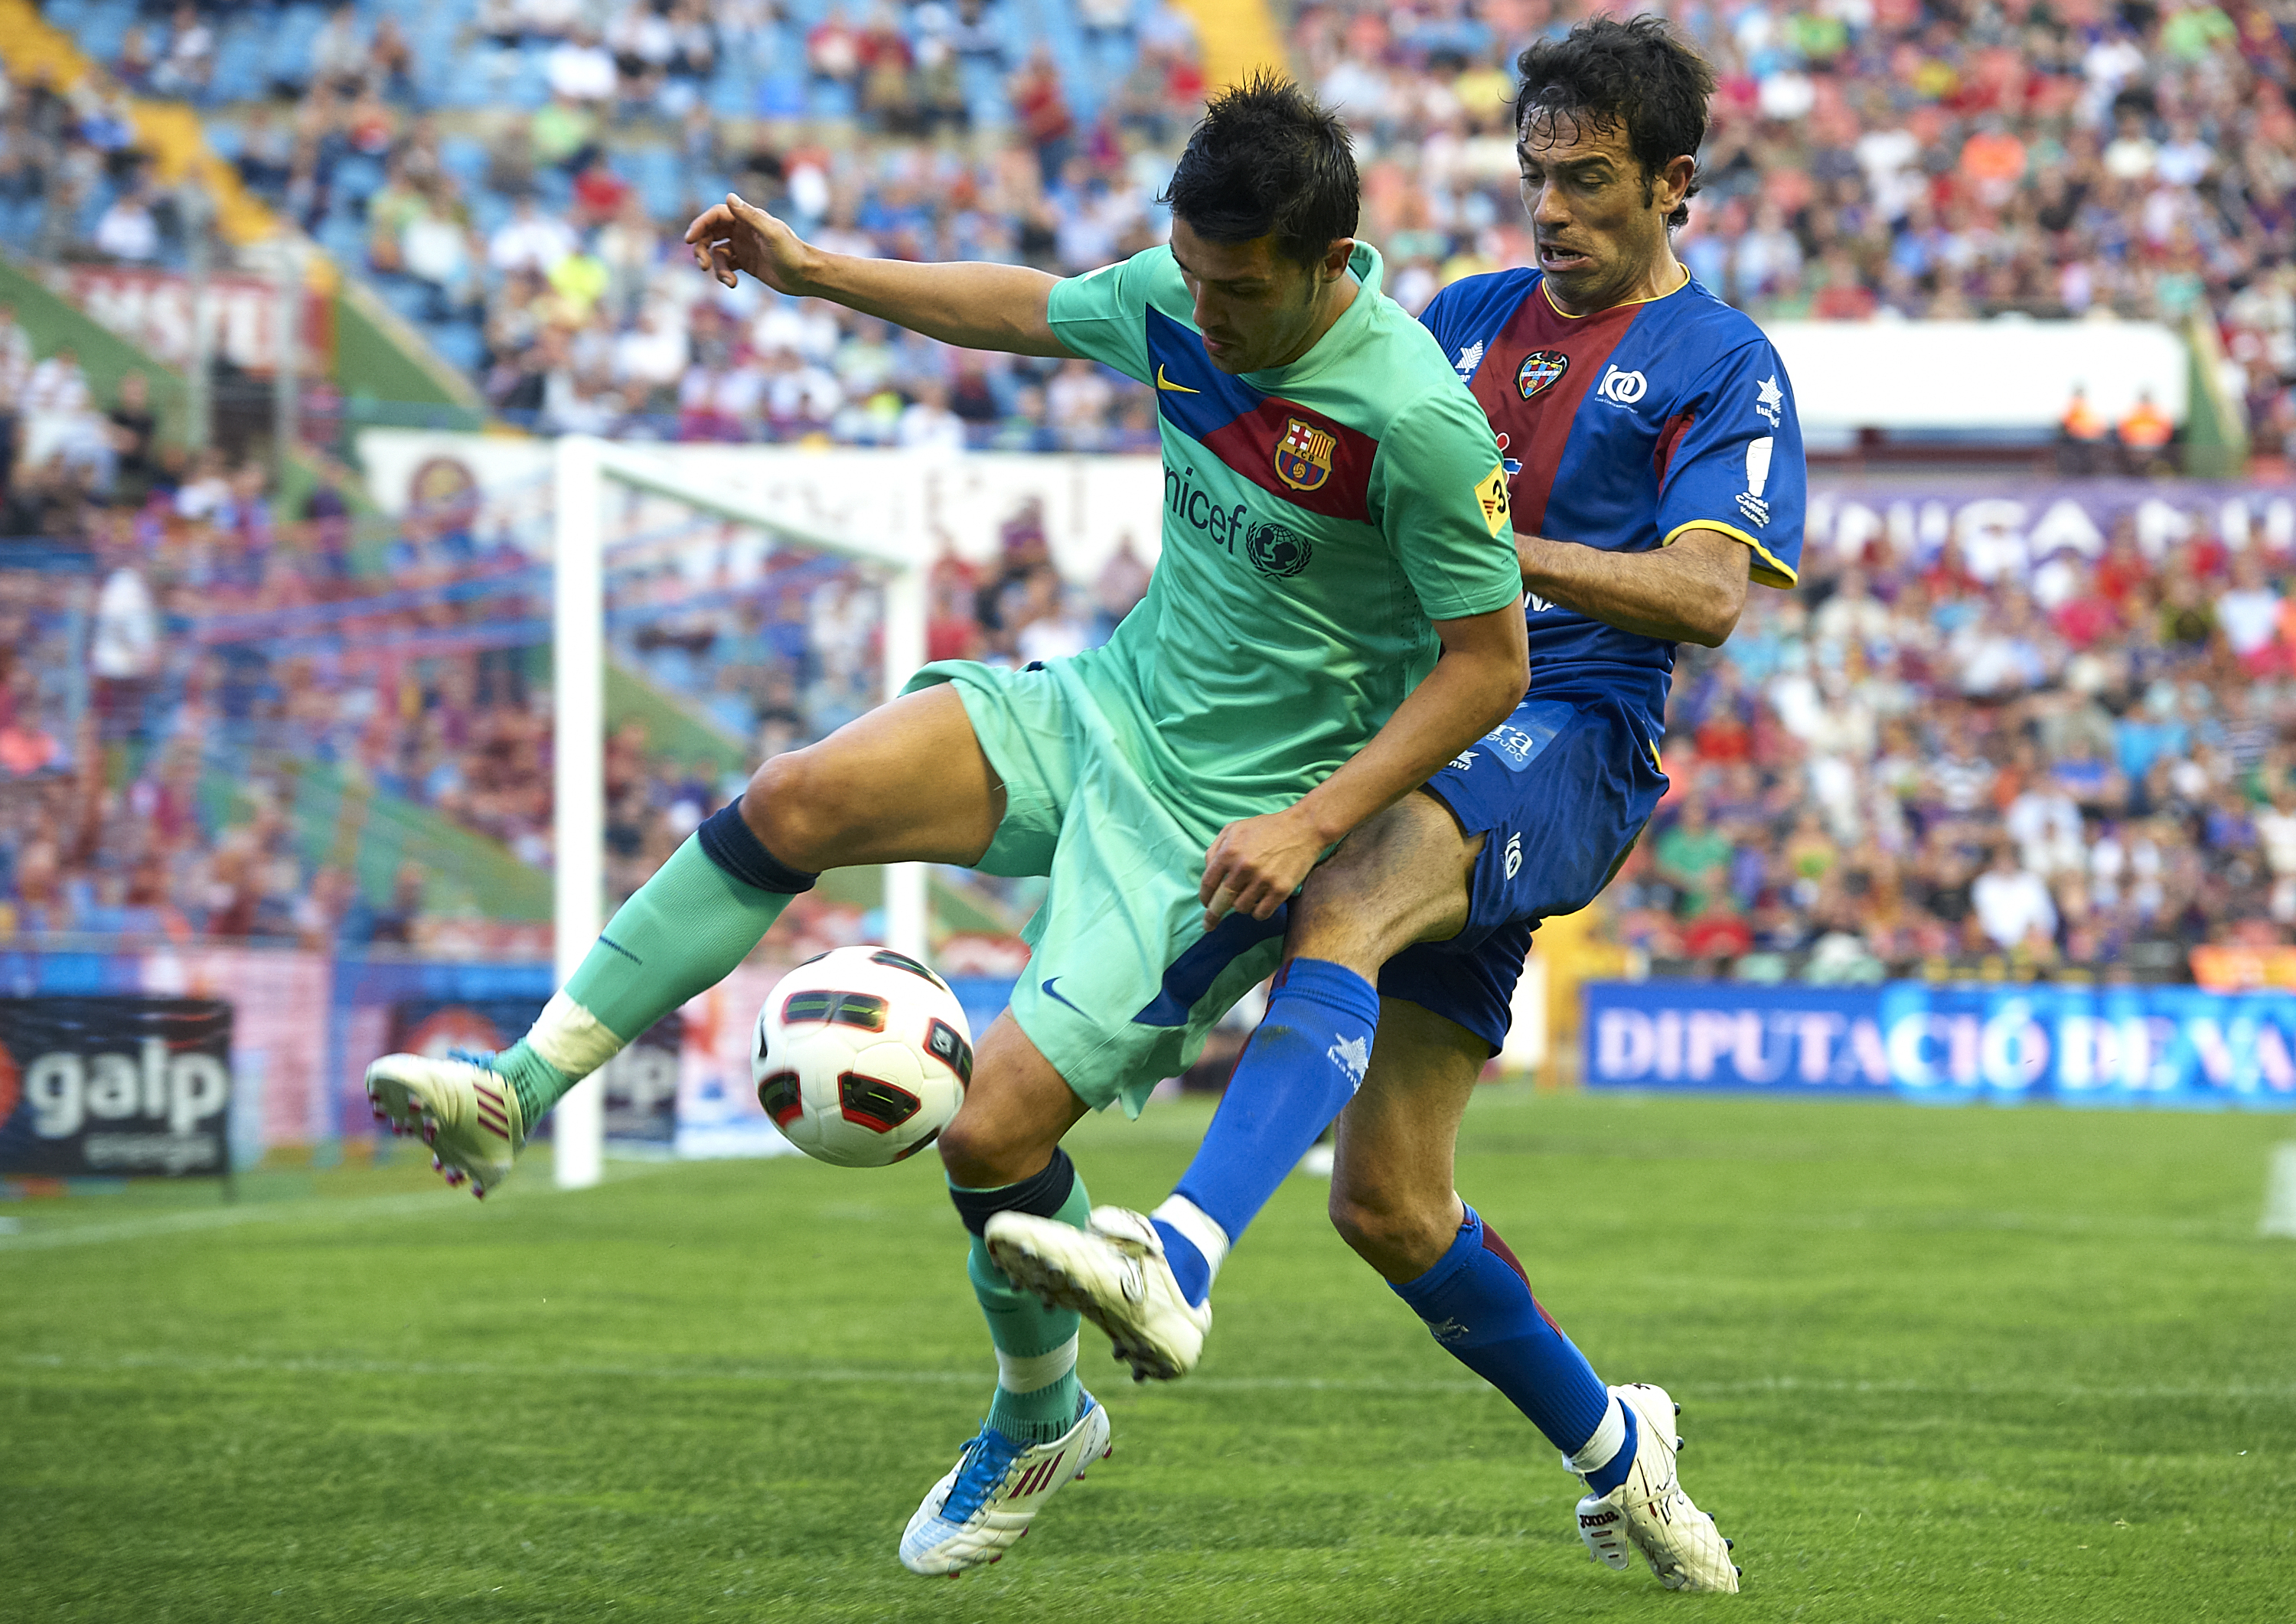 VALENCIA, SPAIN - MAY 11:  David Villa (L) of Barcelona is tackled by Javi Venta of Levante during the La Liga match between Levante UD and Barcelona at Ciutat de Valencia on May 11, 2011 in Valencia, Spain. The match ended 1-1.  (Photo by Manuel Queimade